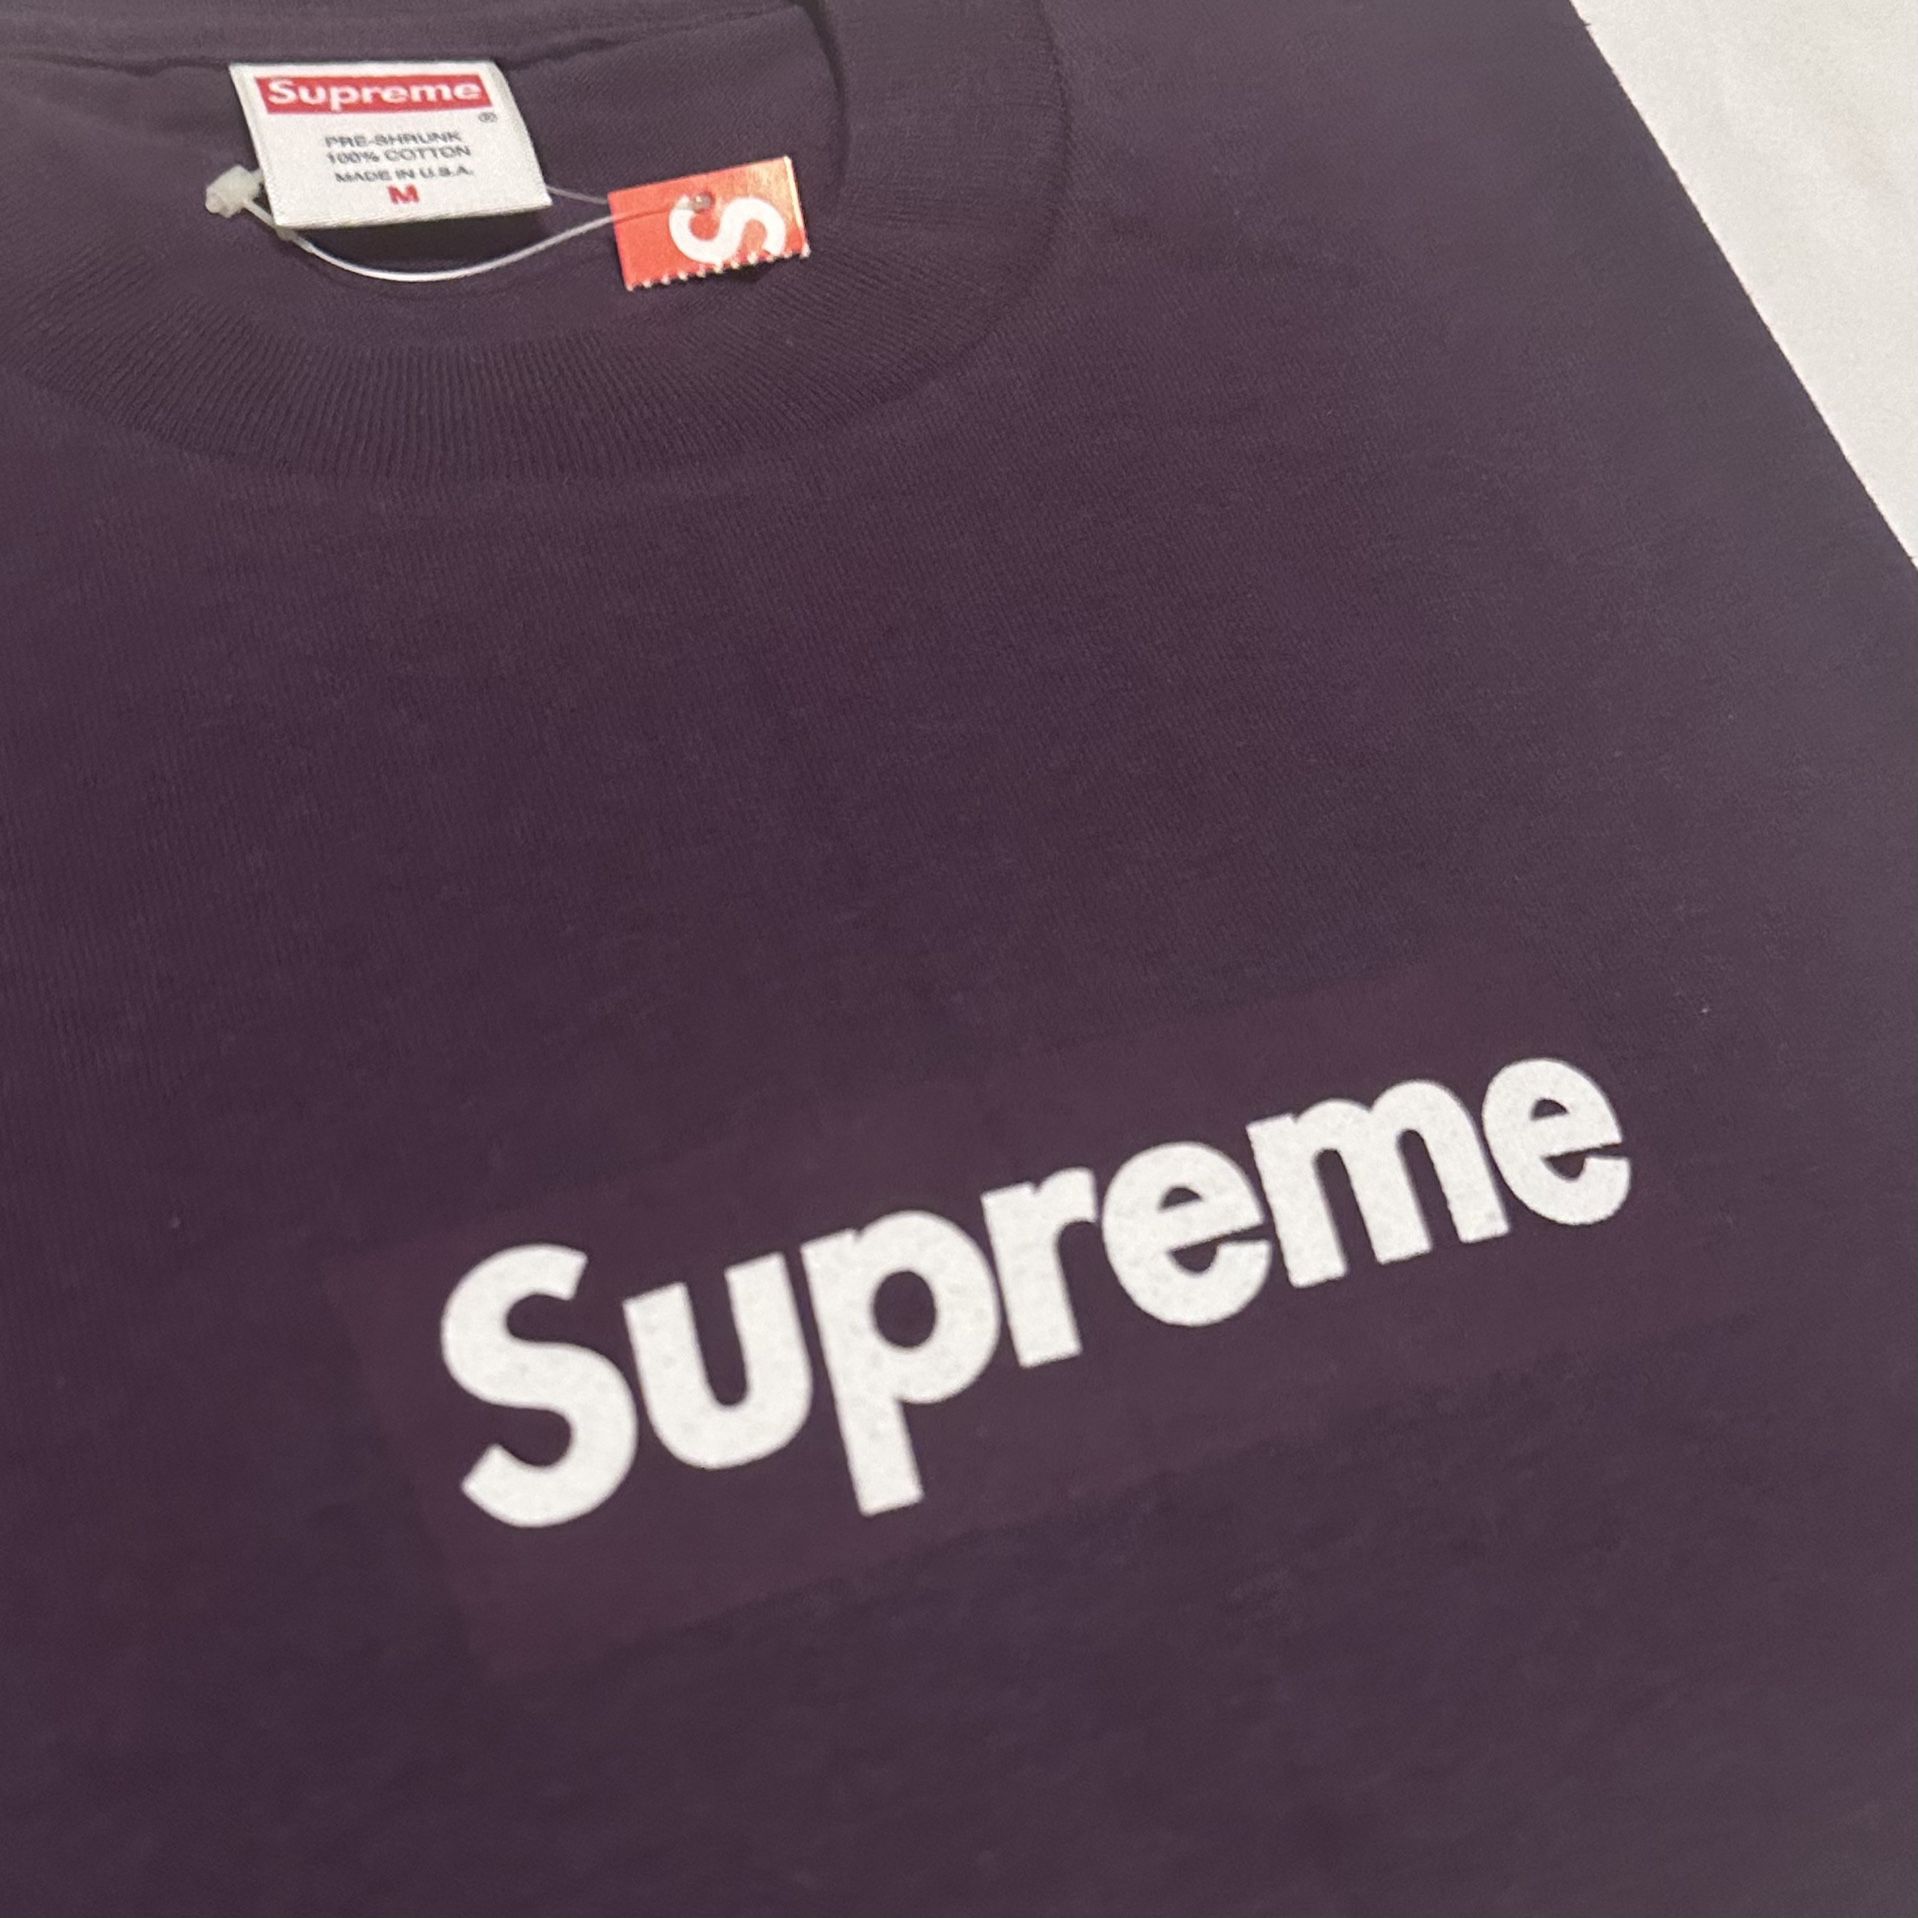 Supreme Tonal Box Logo Tee for Sale in Portland, OR - OfferUp